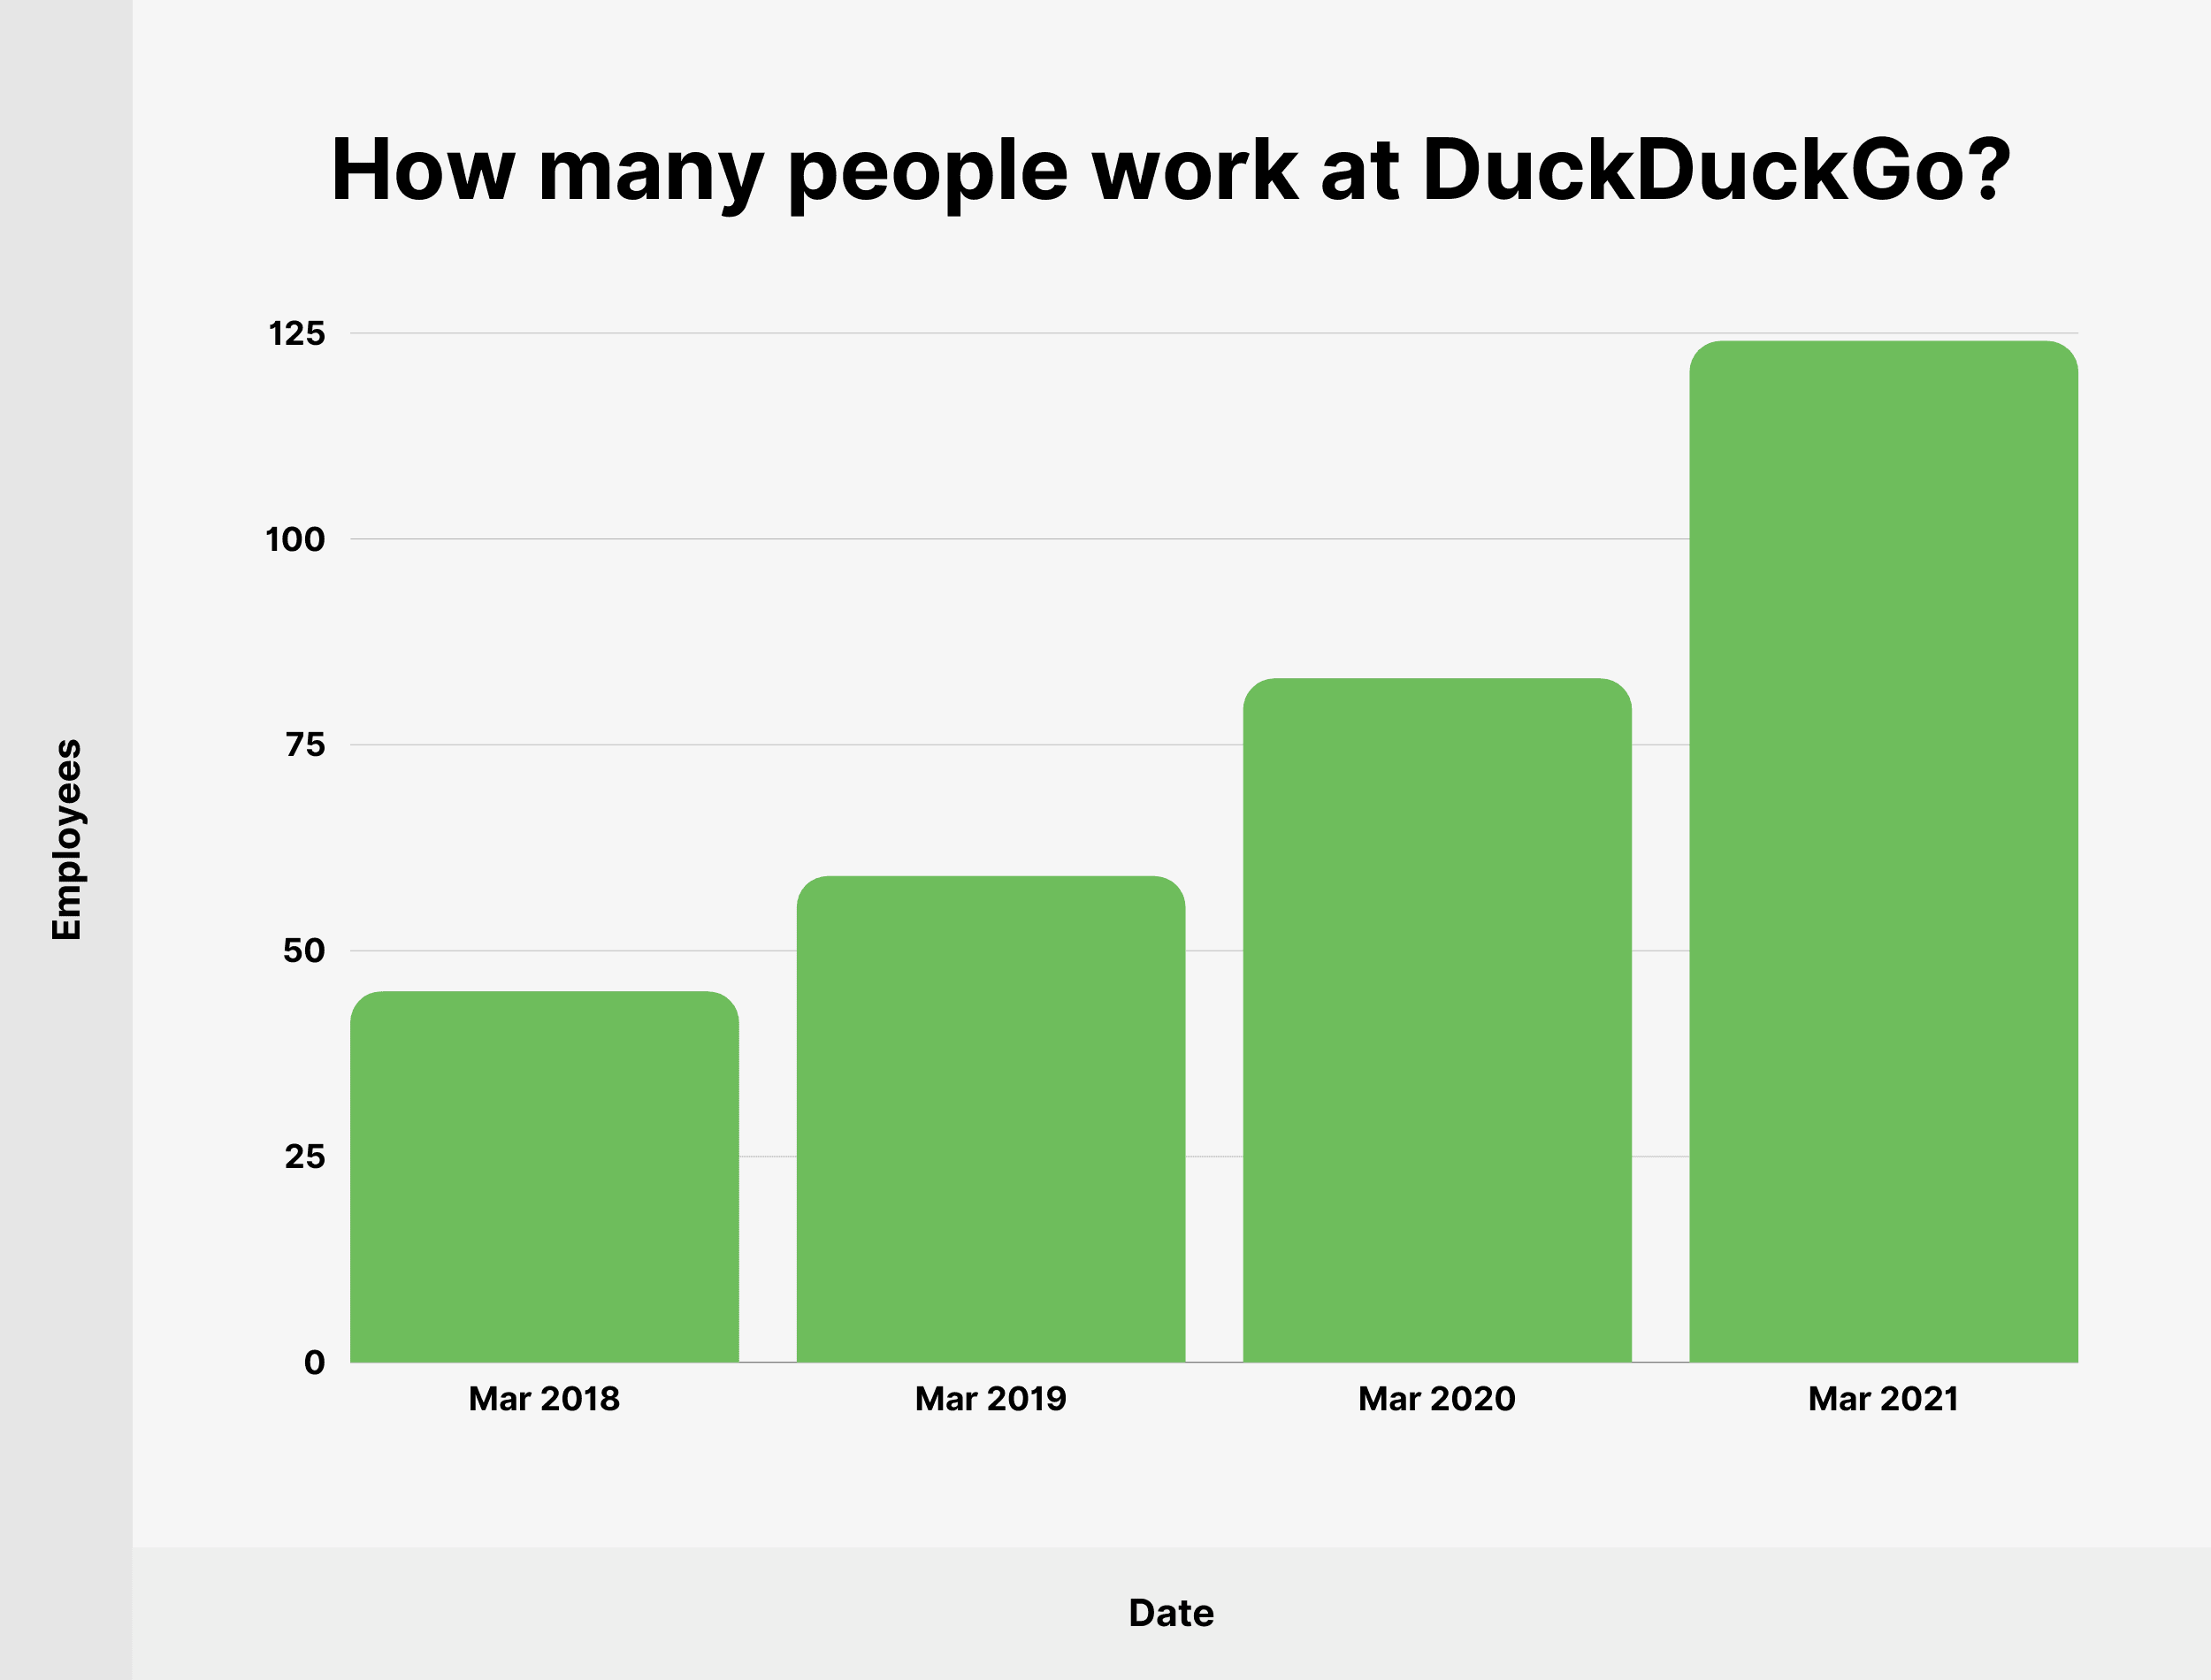 How many people work at DuckDuckGo?